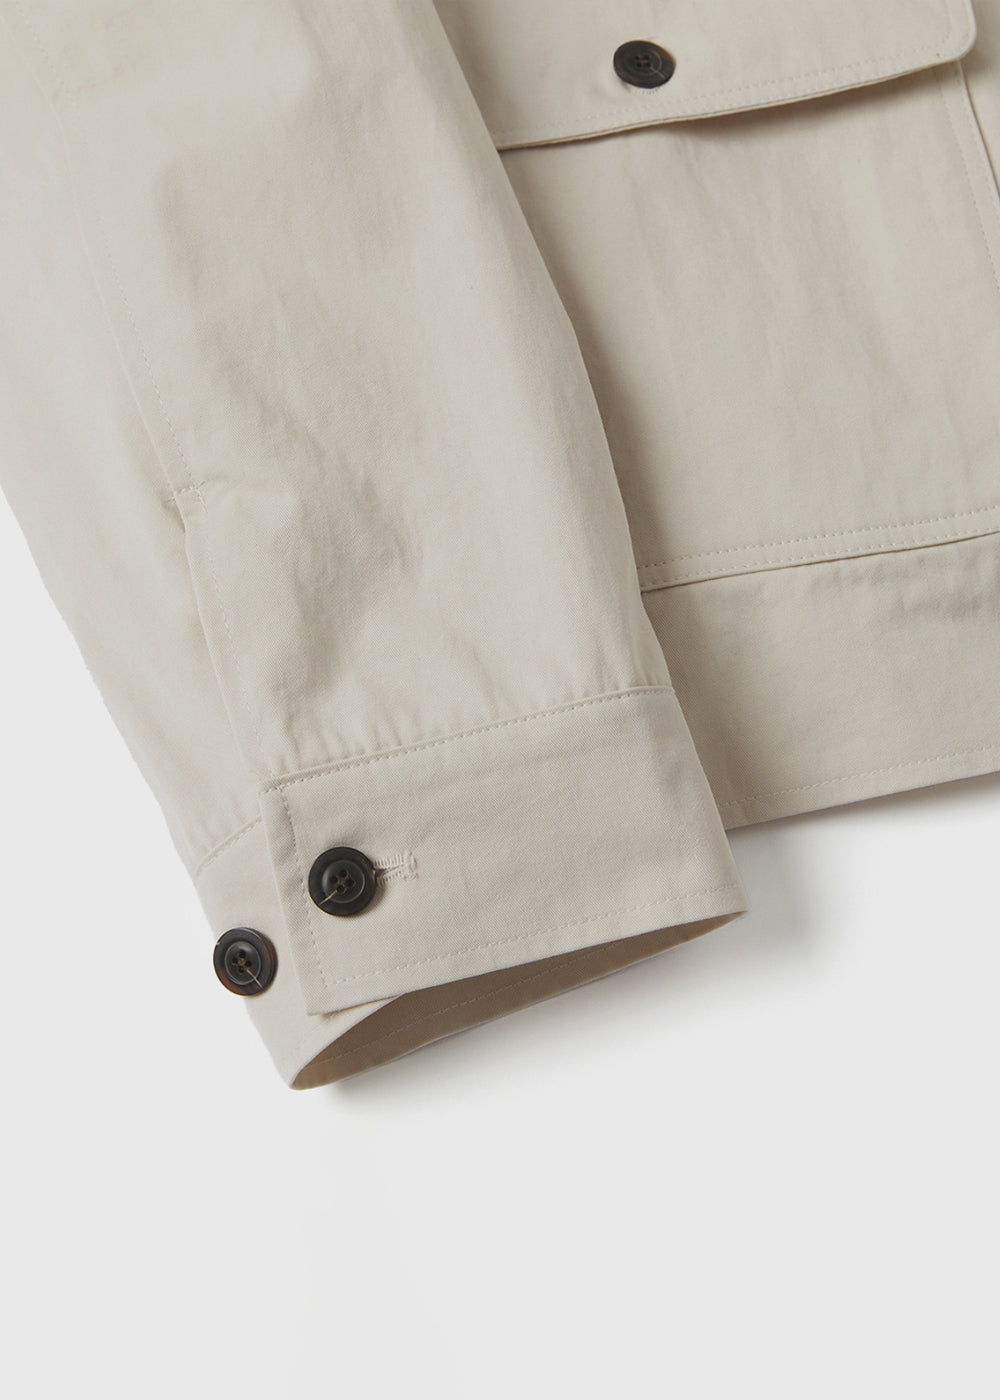 STAND COLLAR OUTPOCKET JACKET_IVORY